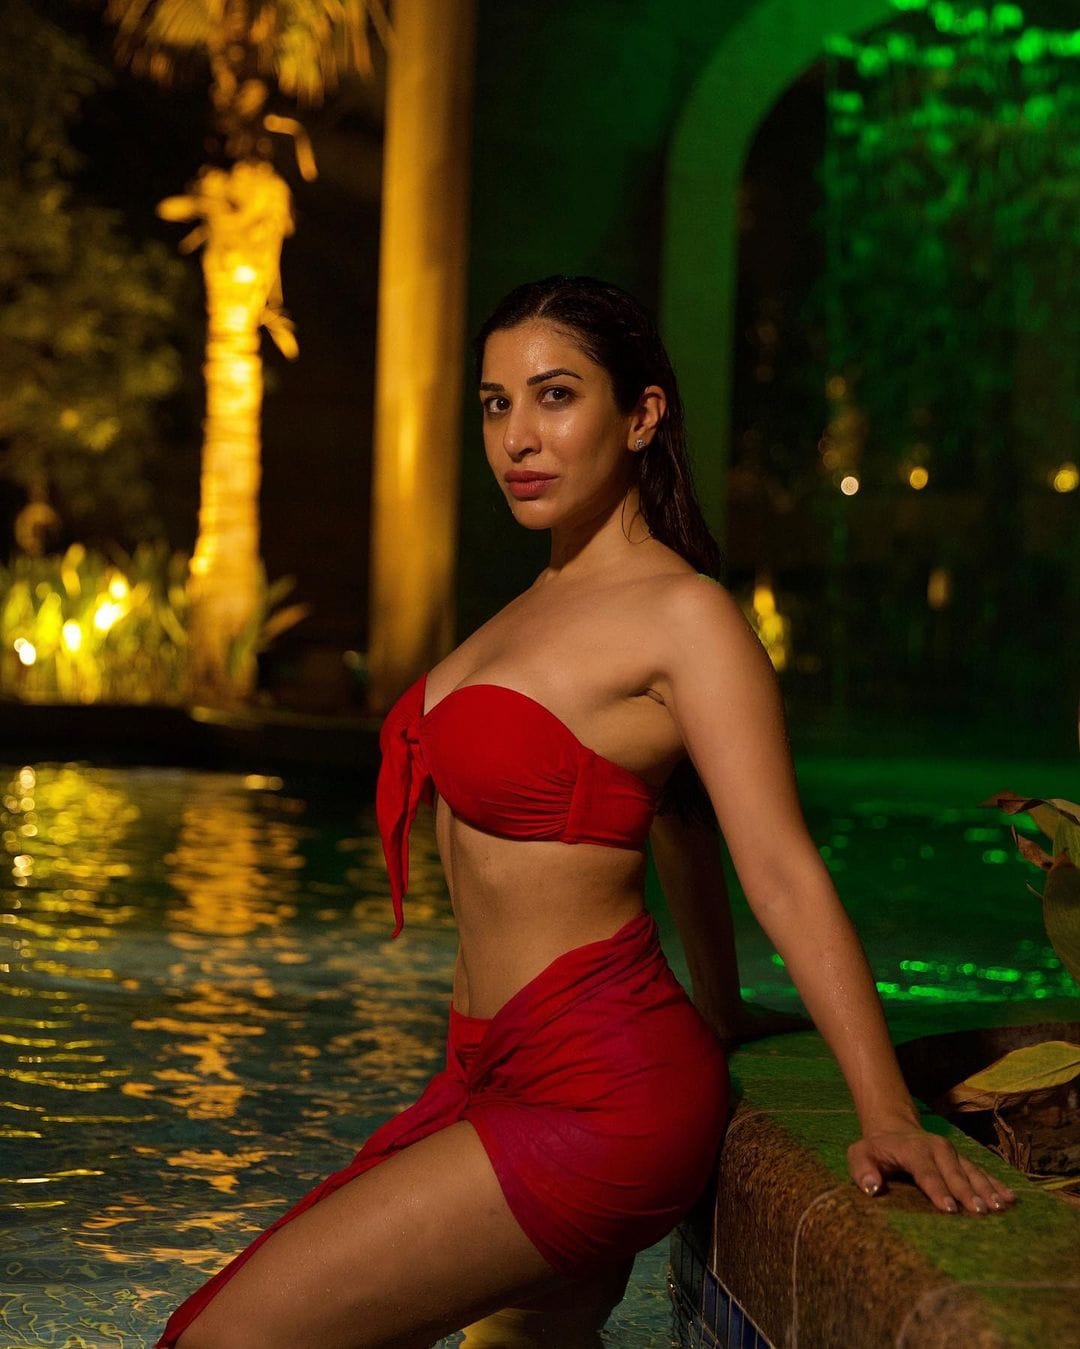 Sophie Choudry has an insane body, which she flaunts in sexy bikinis from time to time